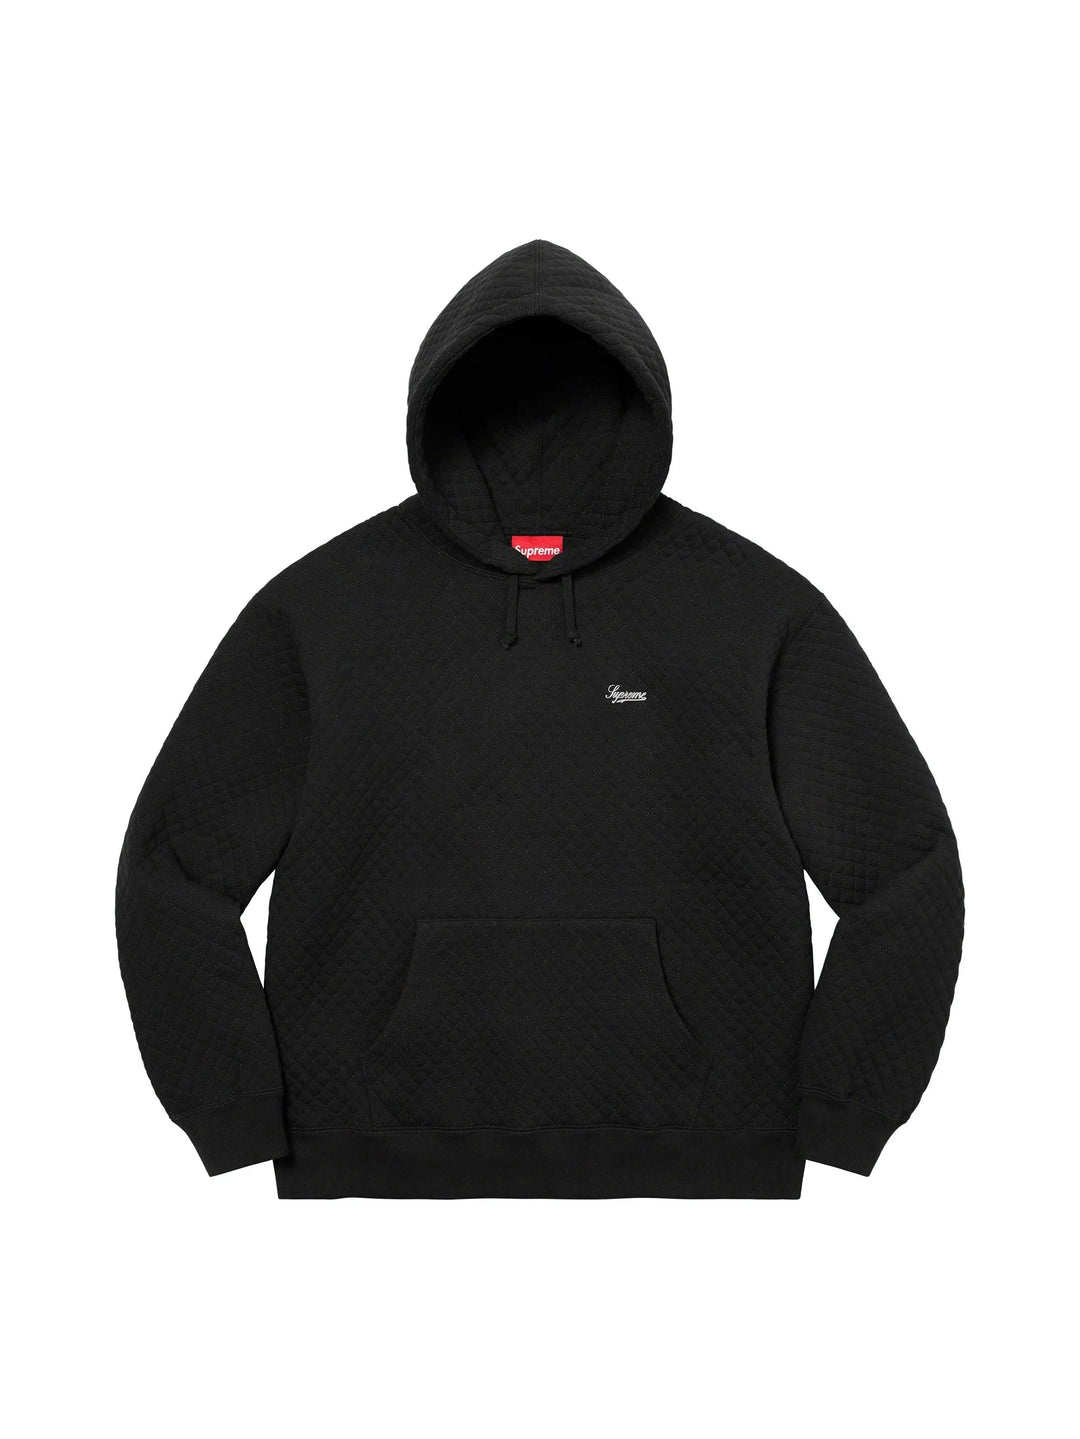 Supreme Micro Quilted Hooded Sweatshirt Black in Auckland, New Zealand - Shop name